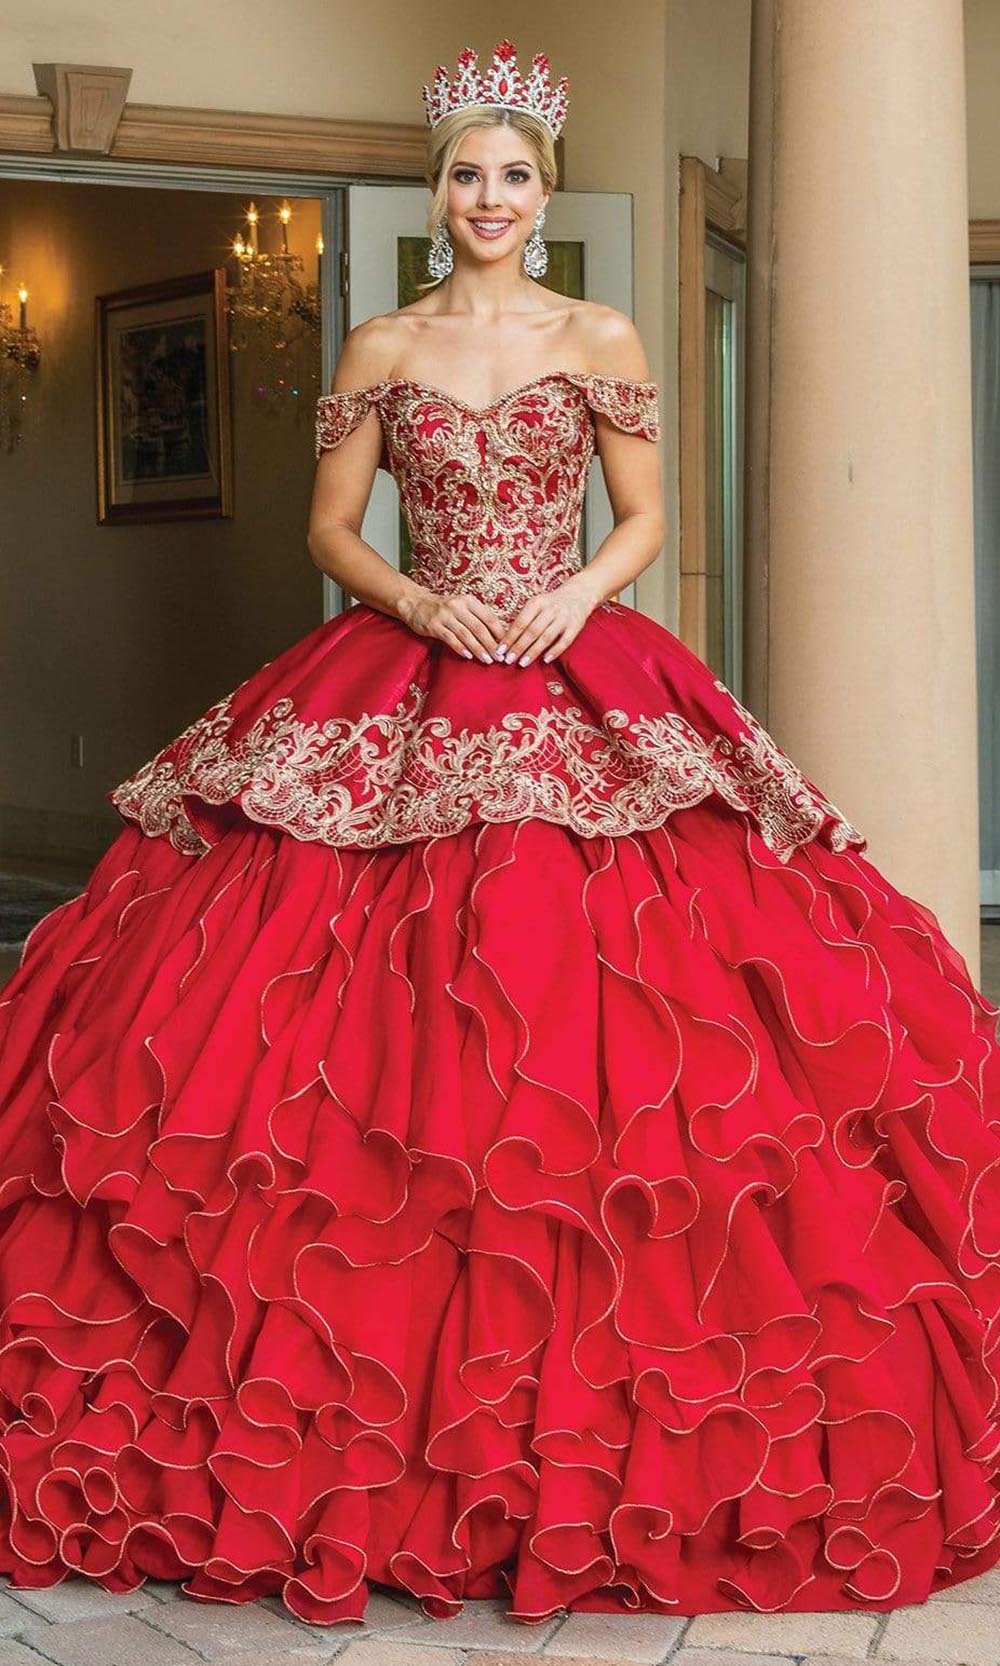 Image of Dancing Queen - 1599 Applique-Ornate Ruffled Ballgown